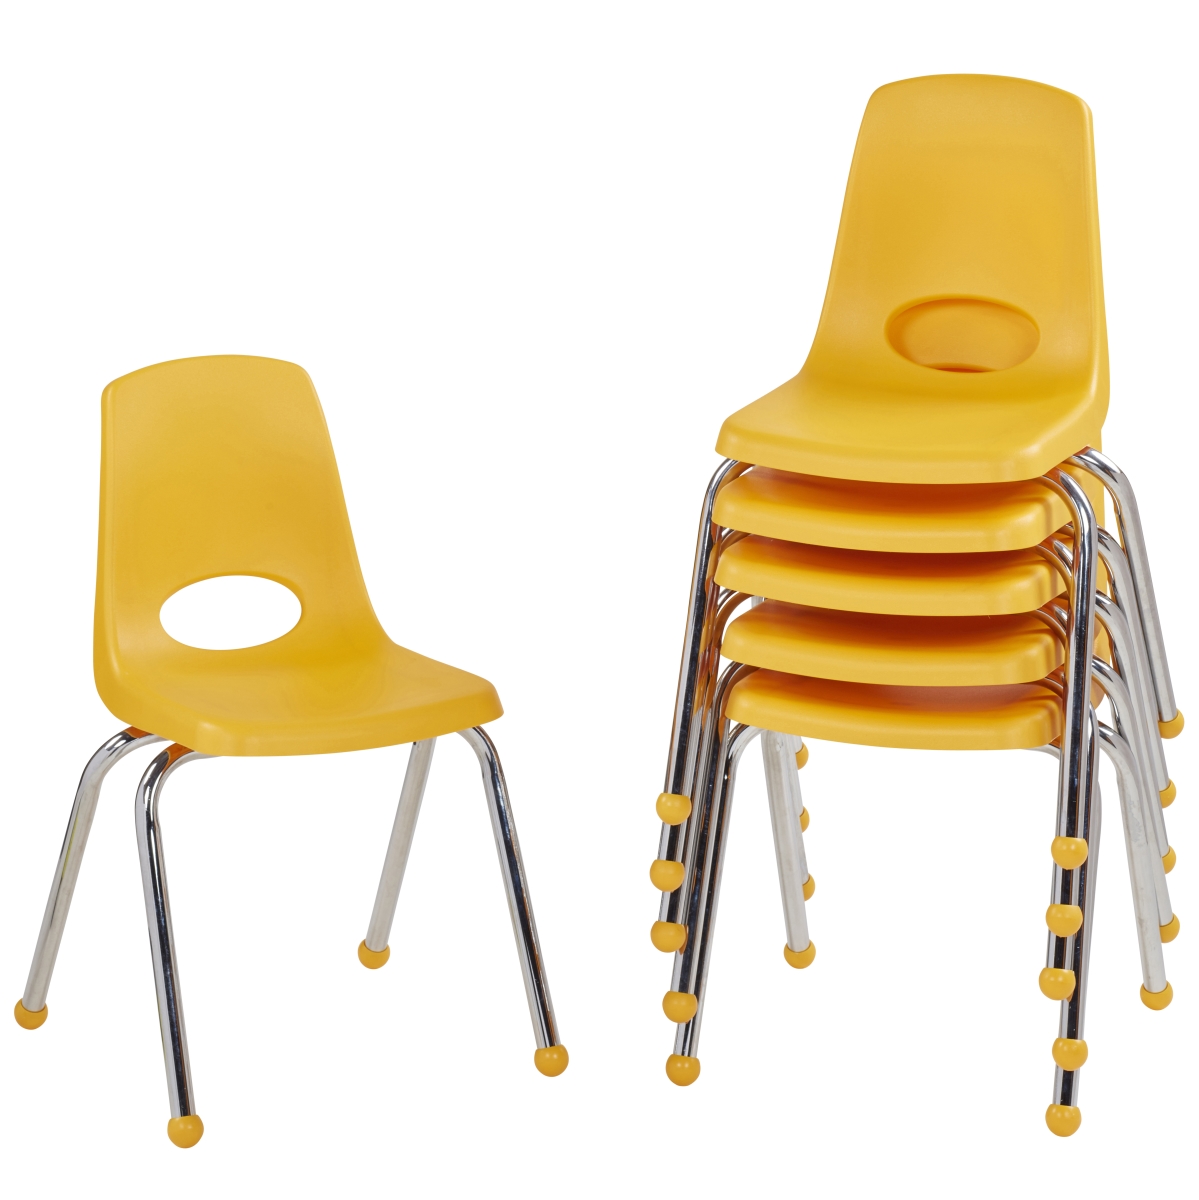 10367-ye 16 In. Stack Chair With Ball Glide - Yellow - Pack Of 6